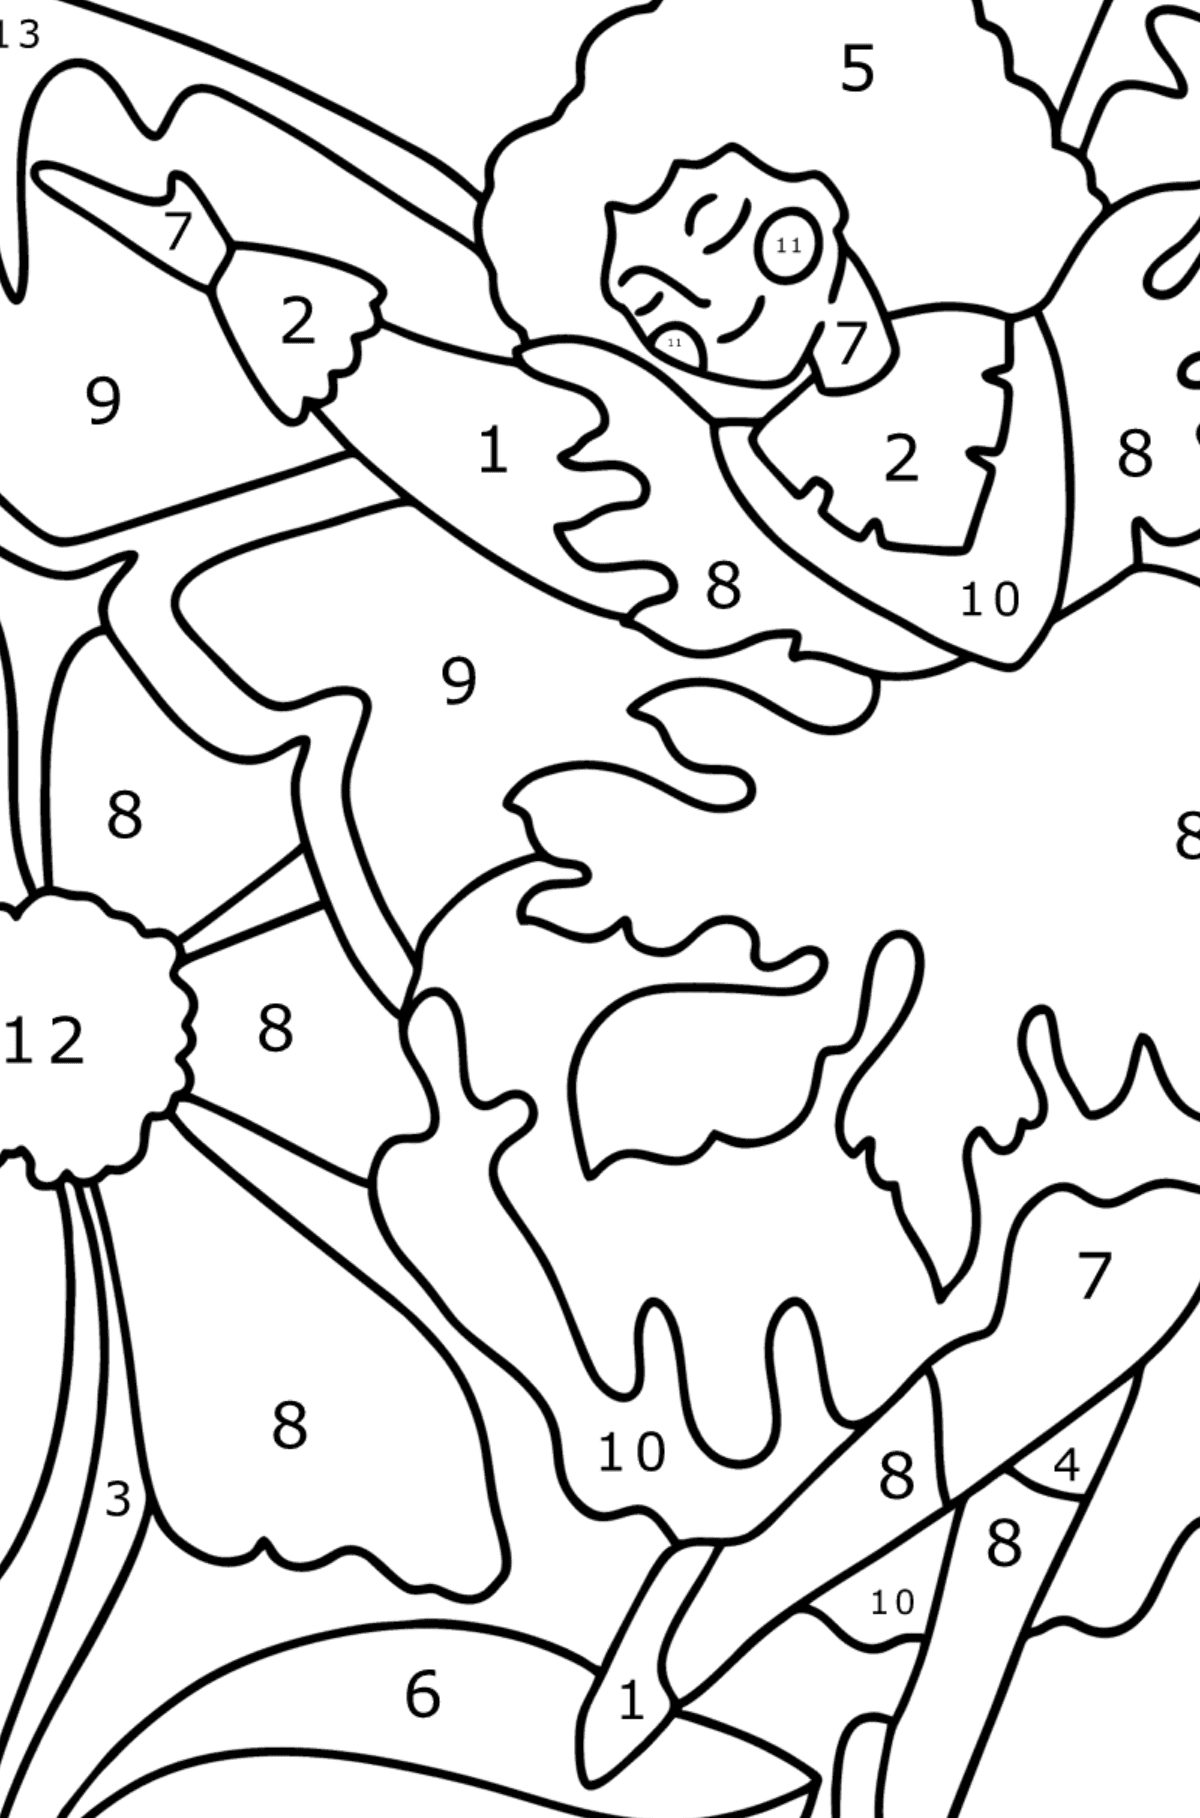 Fairy flies coloring page - Coloring by Numbers for Kids